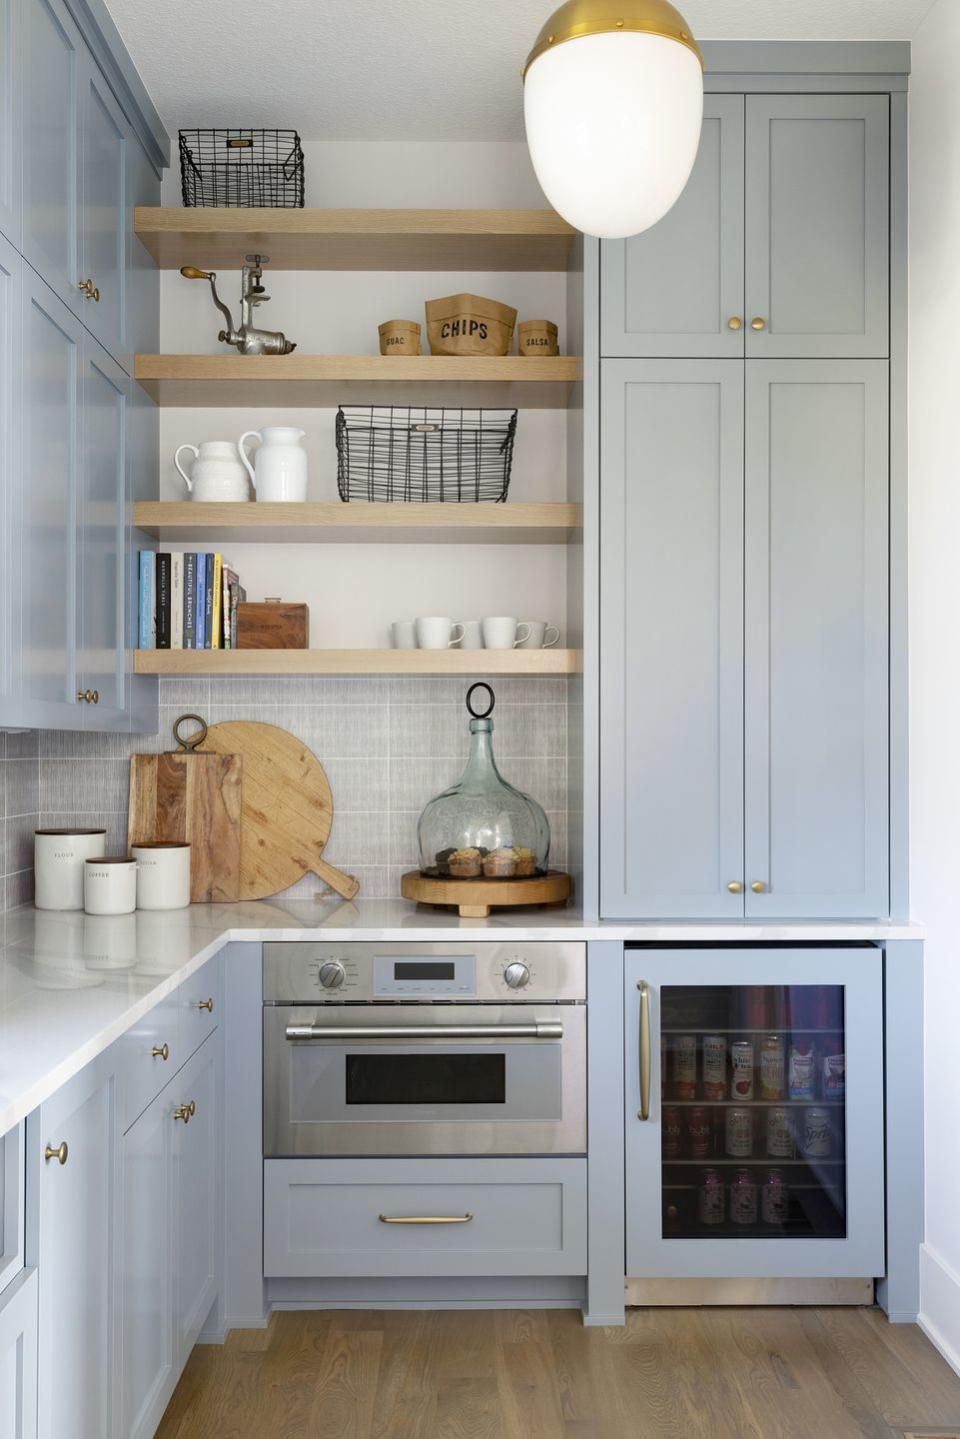 bria hammel interiors baby blue cabinets and open shelving